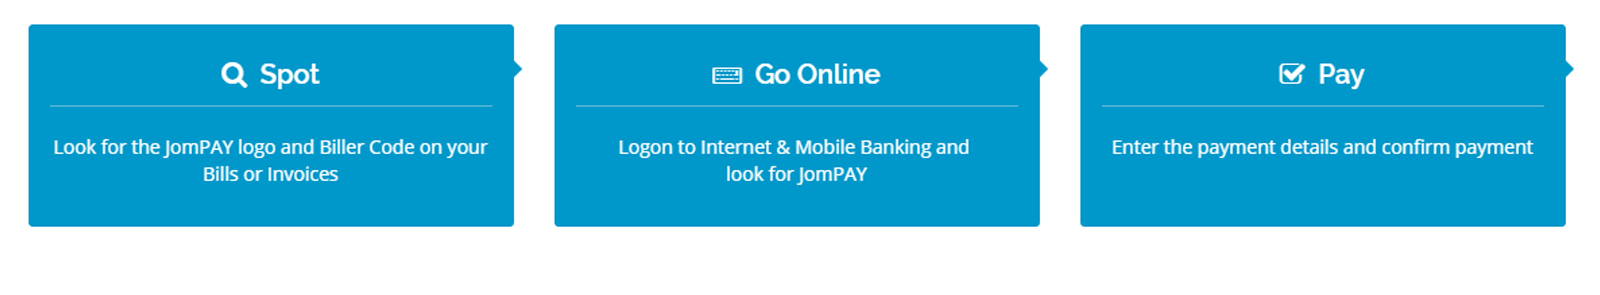 Simple Steps to Make Payments with JomPAY